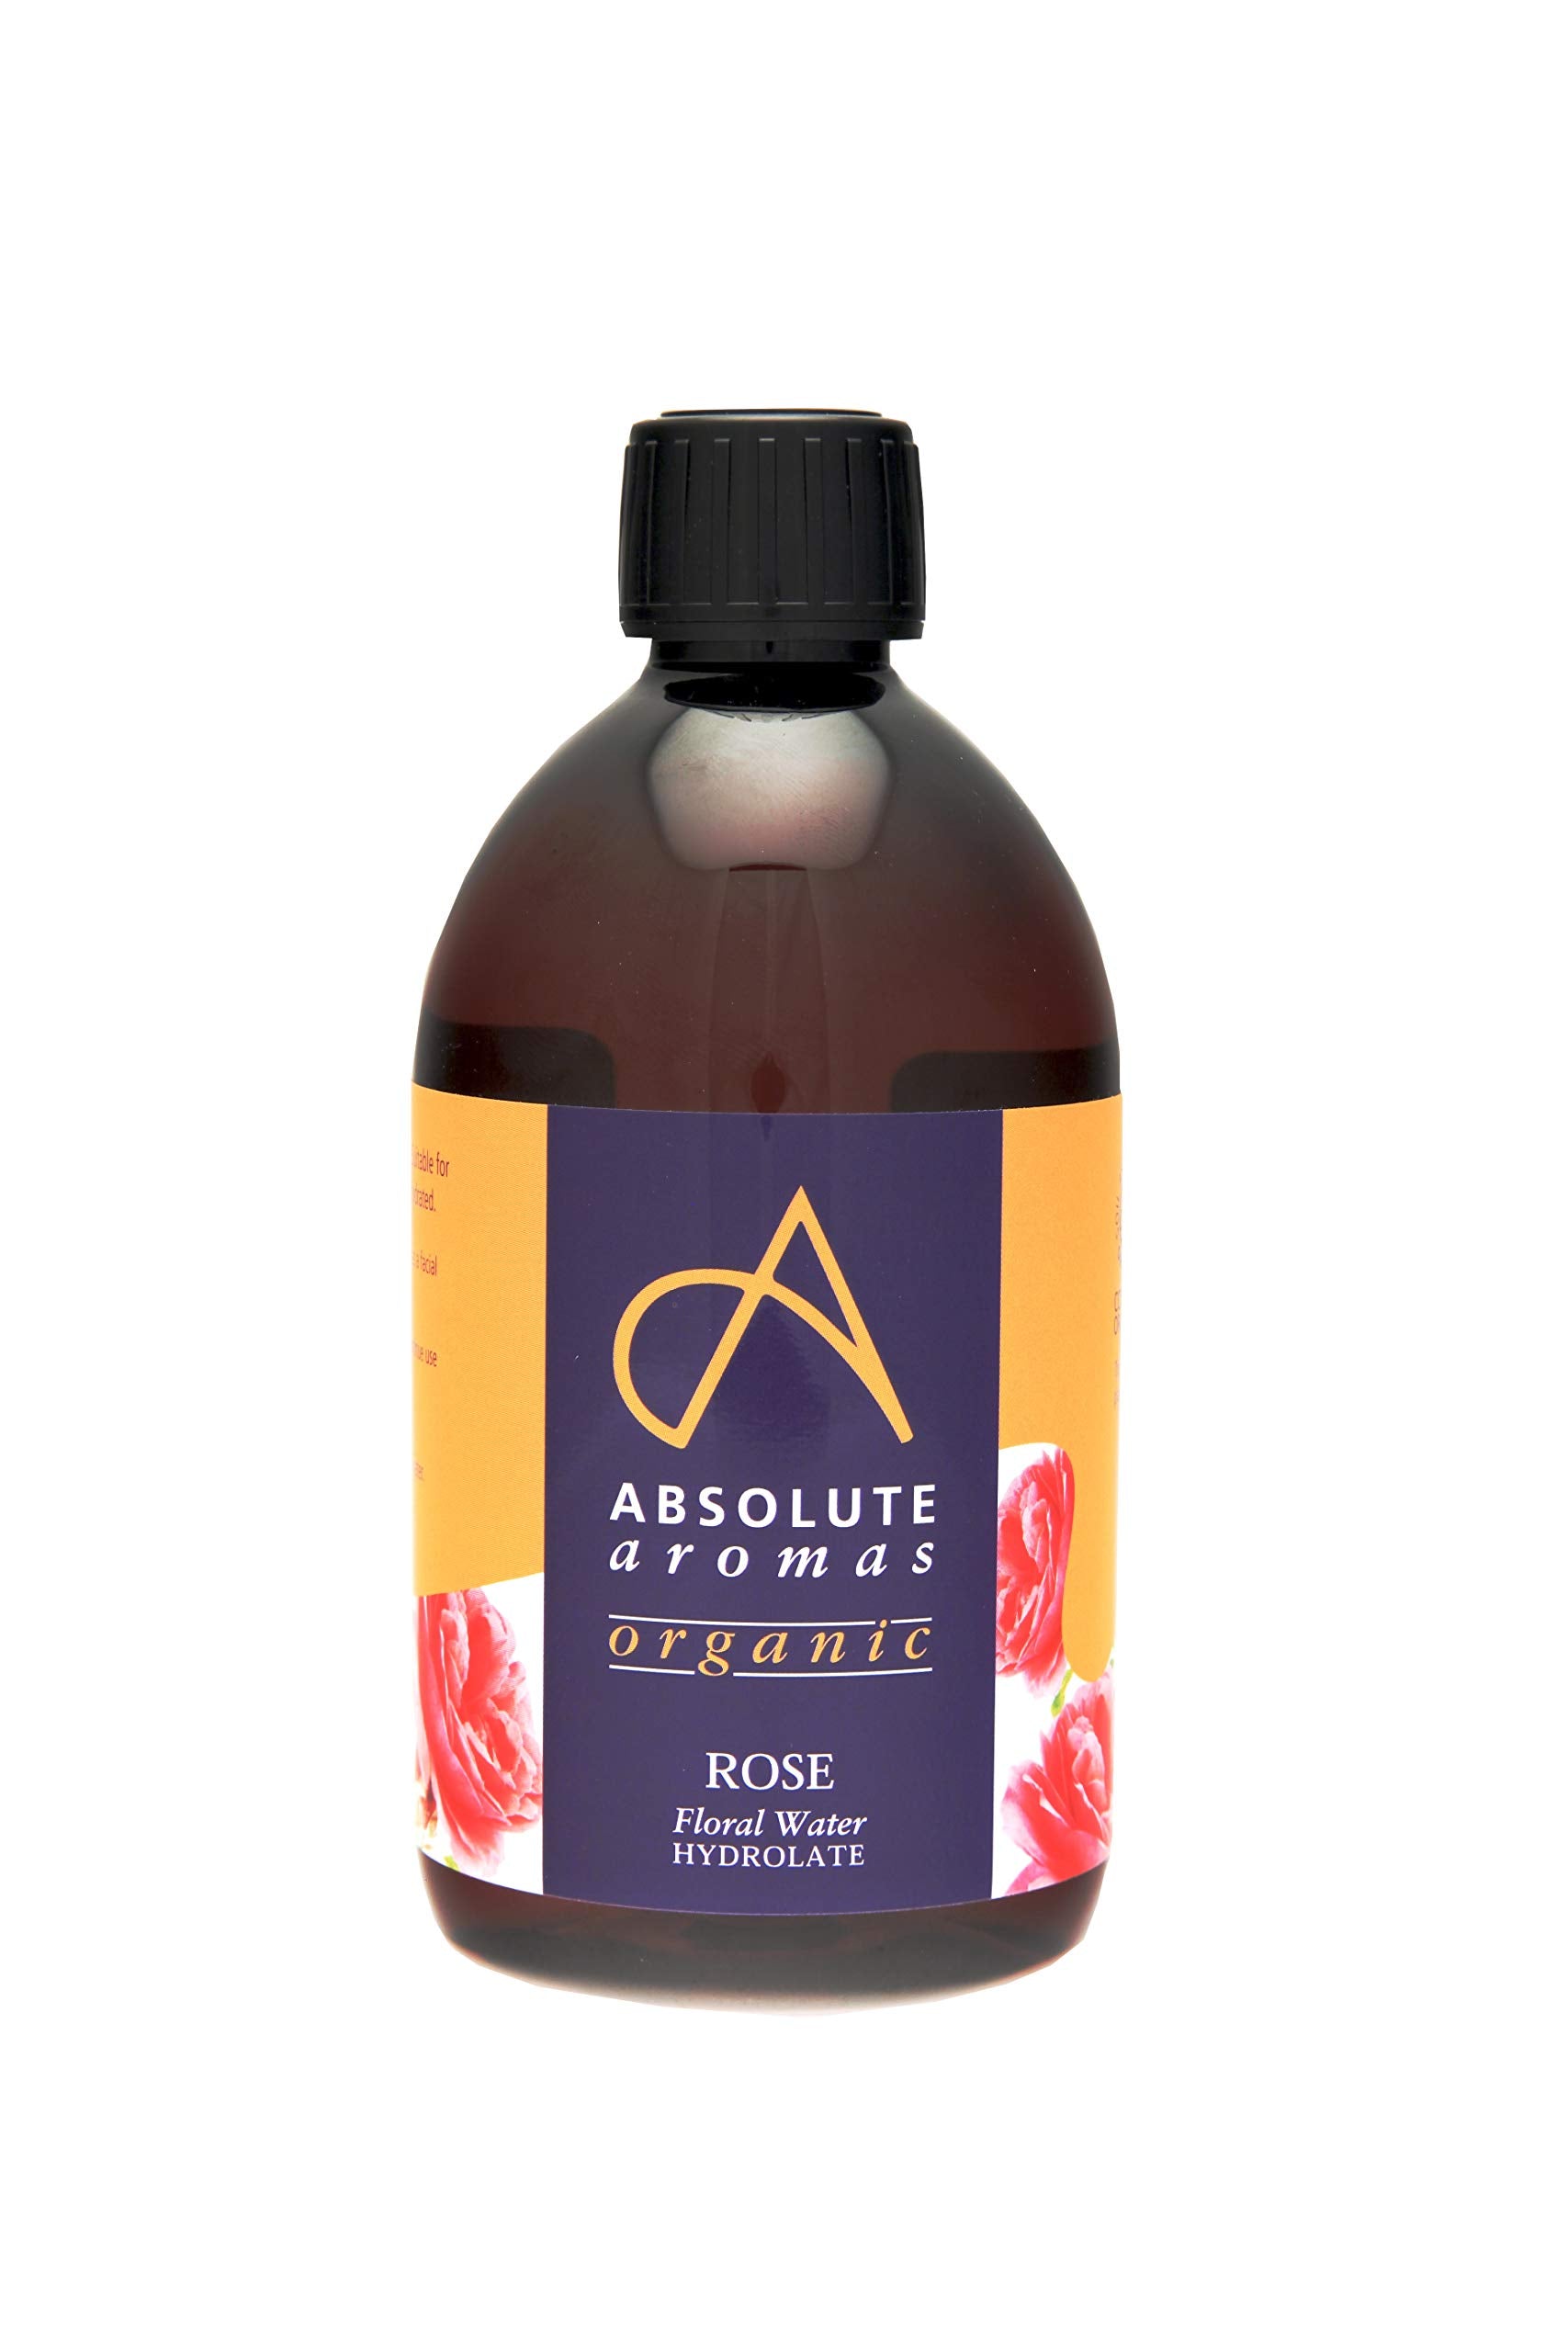 Absolute Aromas Certified Organic Bulgarian Rose Water 500ml - 100% Pure, Natural, Nourishing and Hydrating Facial Toner - A Sweet and Versatile Floral Water Suitable for All Skin Types